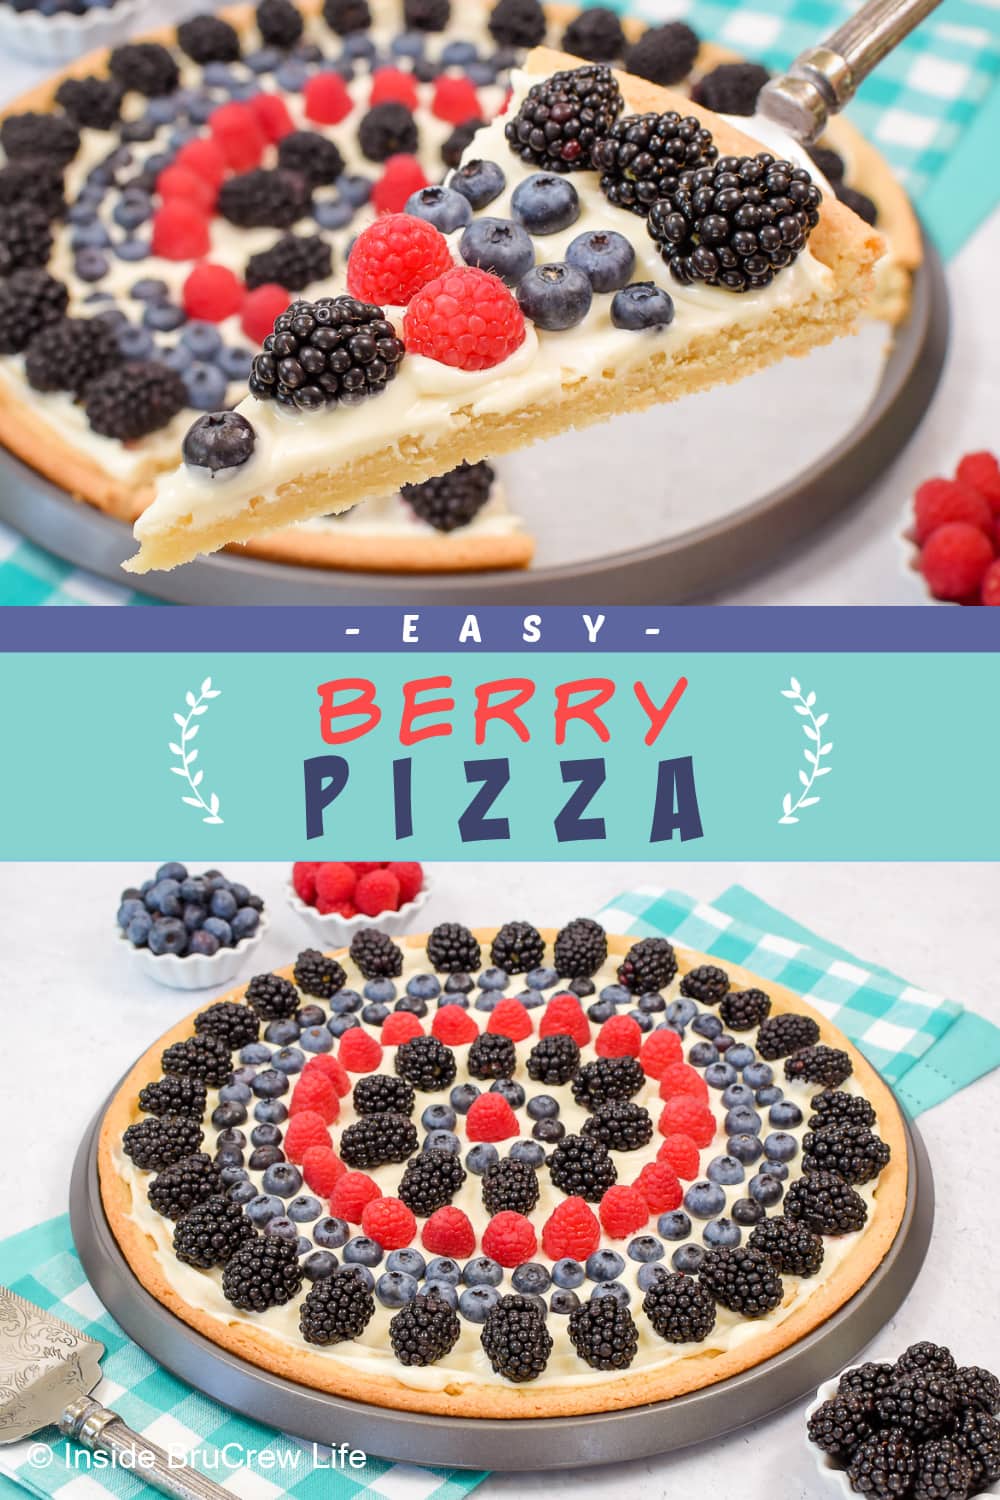 Two pictures of berry pizza collaged together with a blue text box.